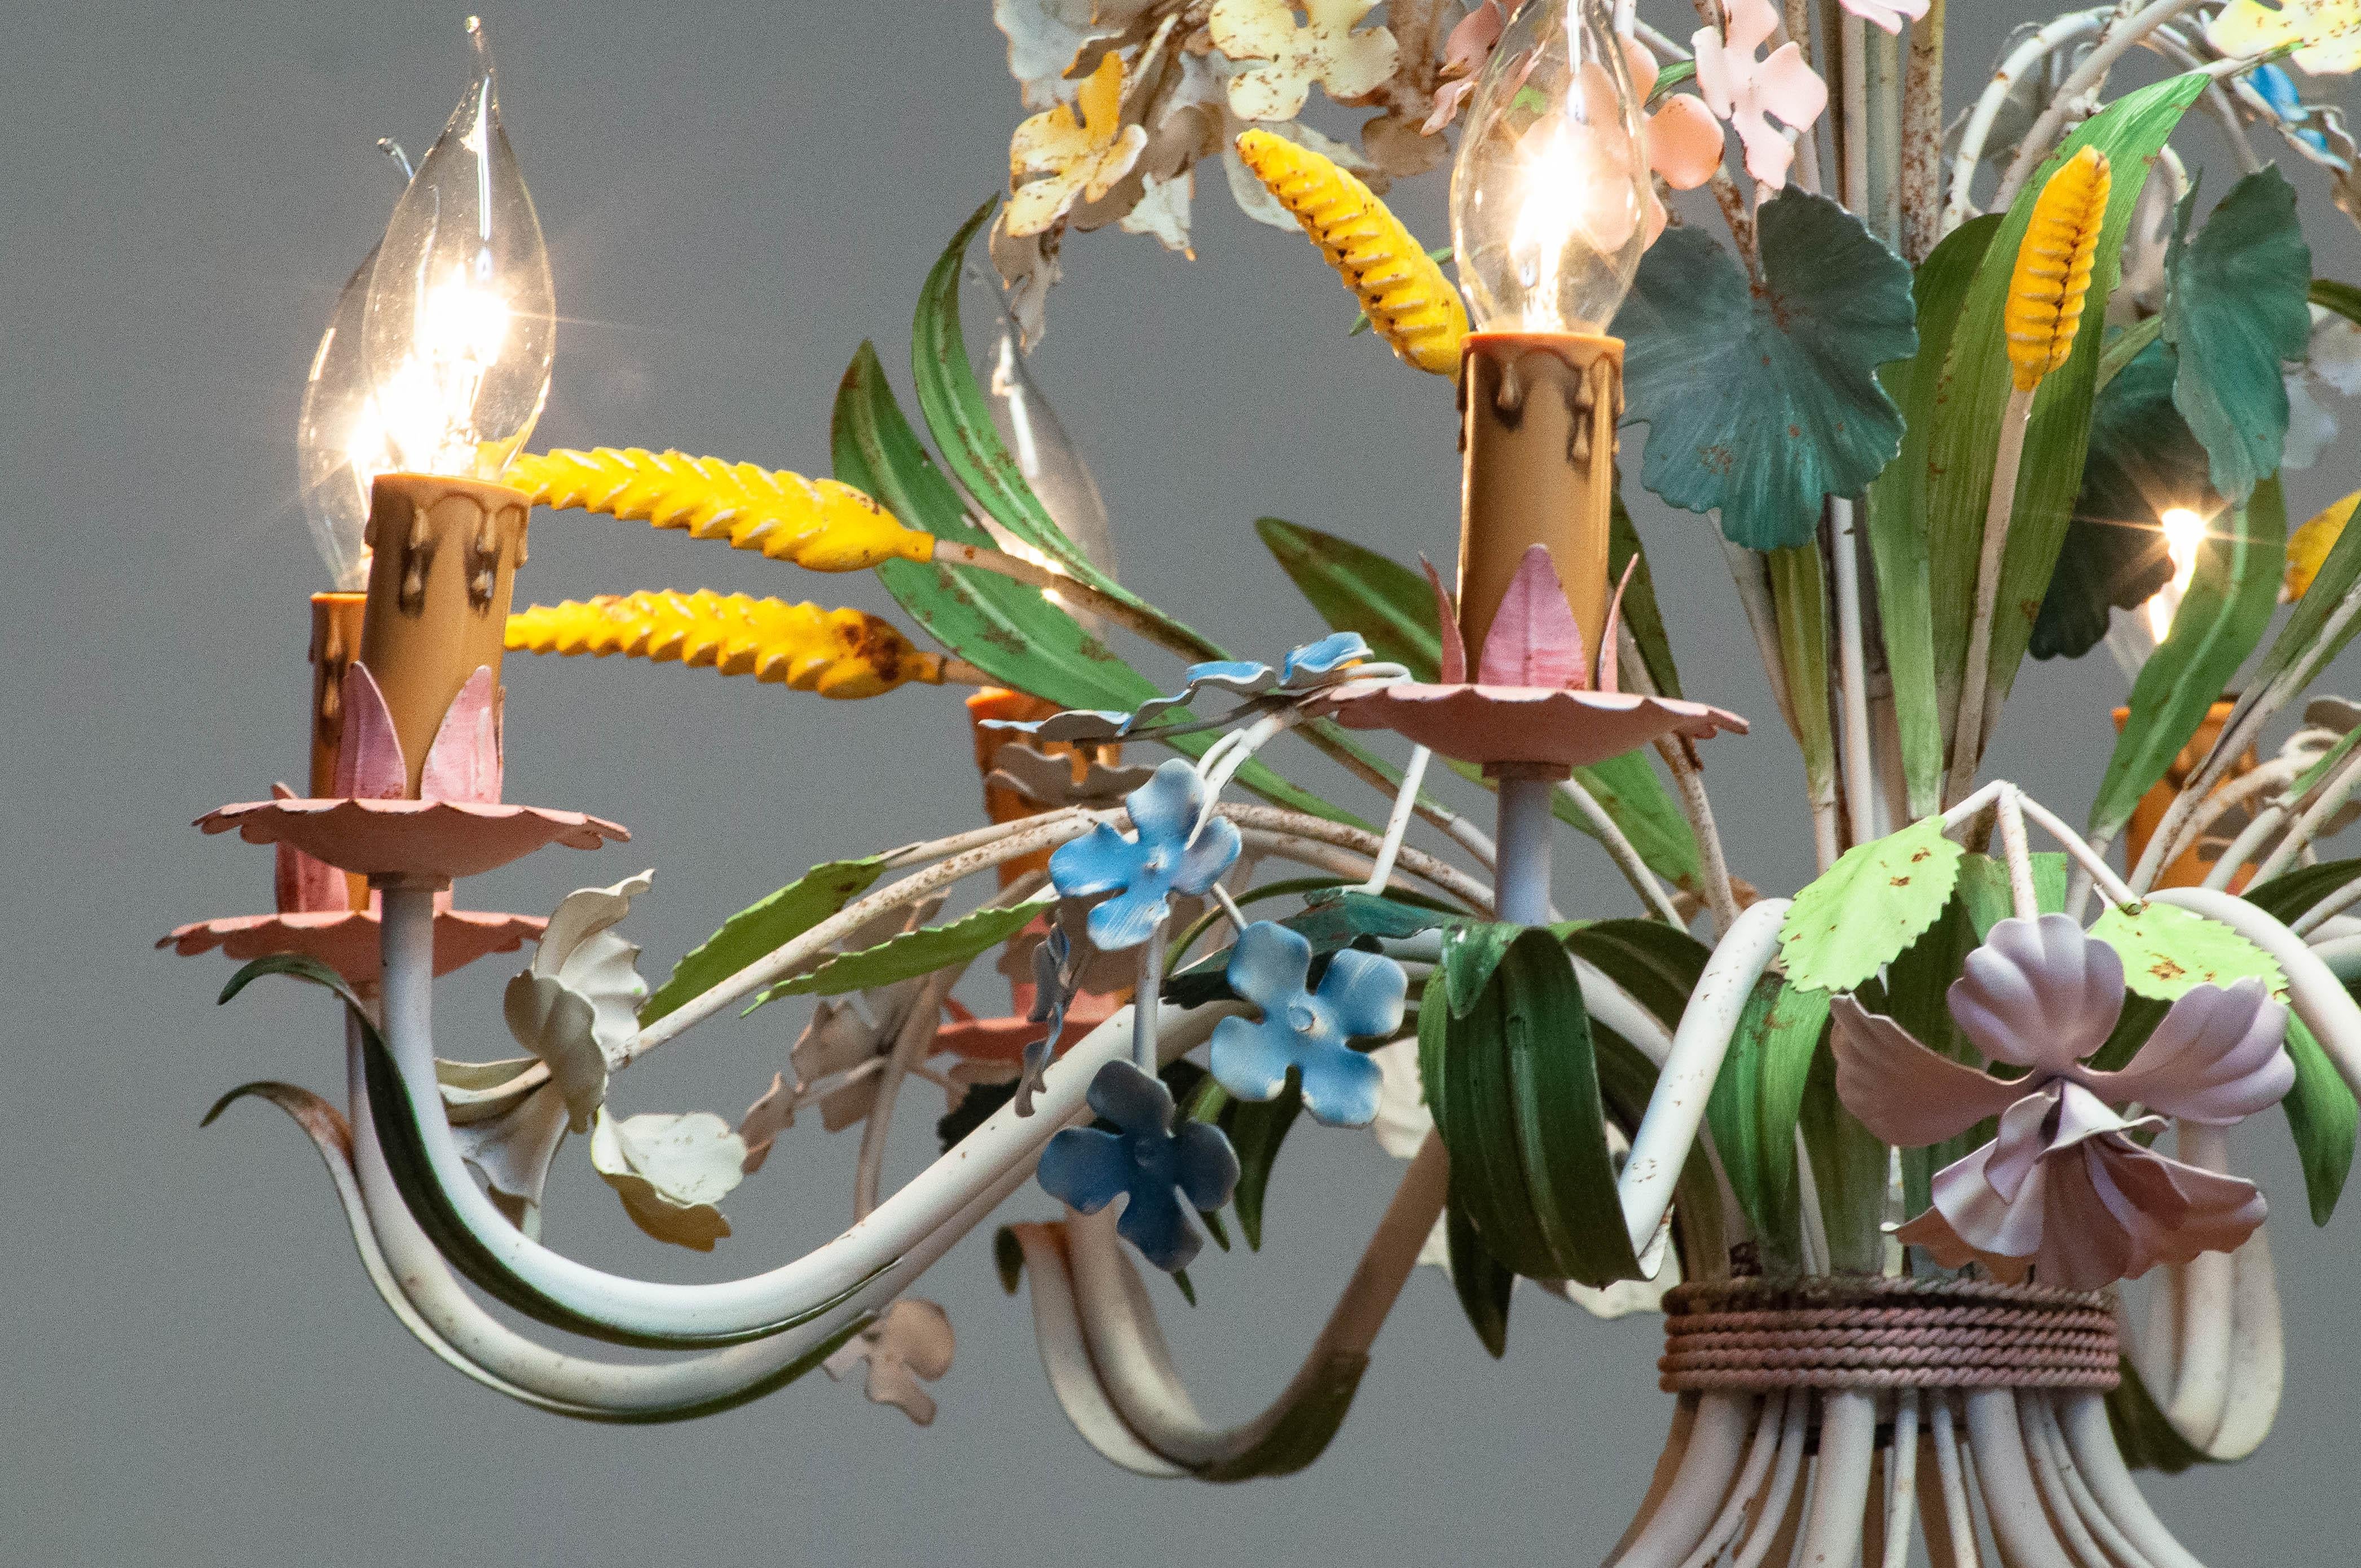 1950s Large Boho Chic Italian Tole Painted Metal Chandelier With Floral Decor In Good Condition In Silvolde, Gelderland